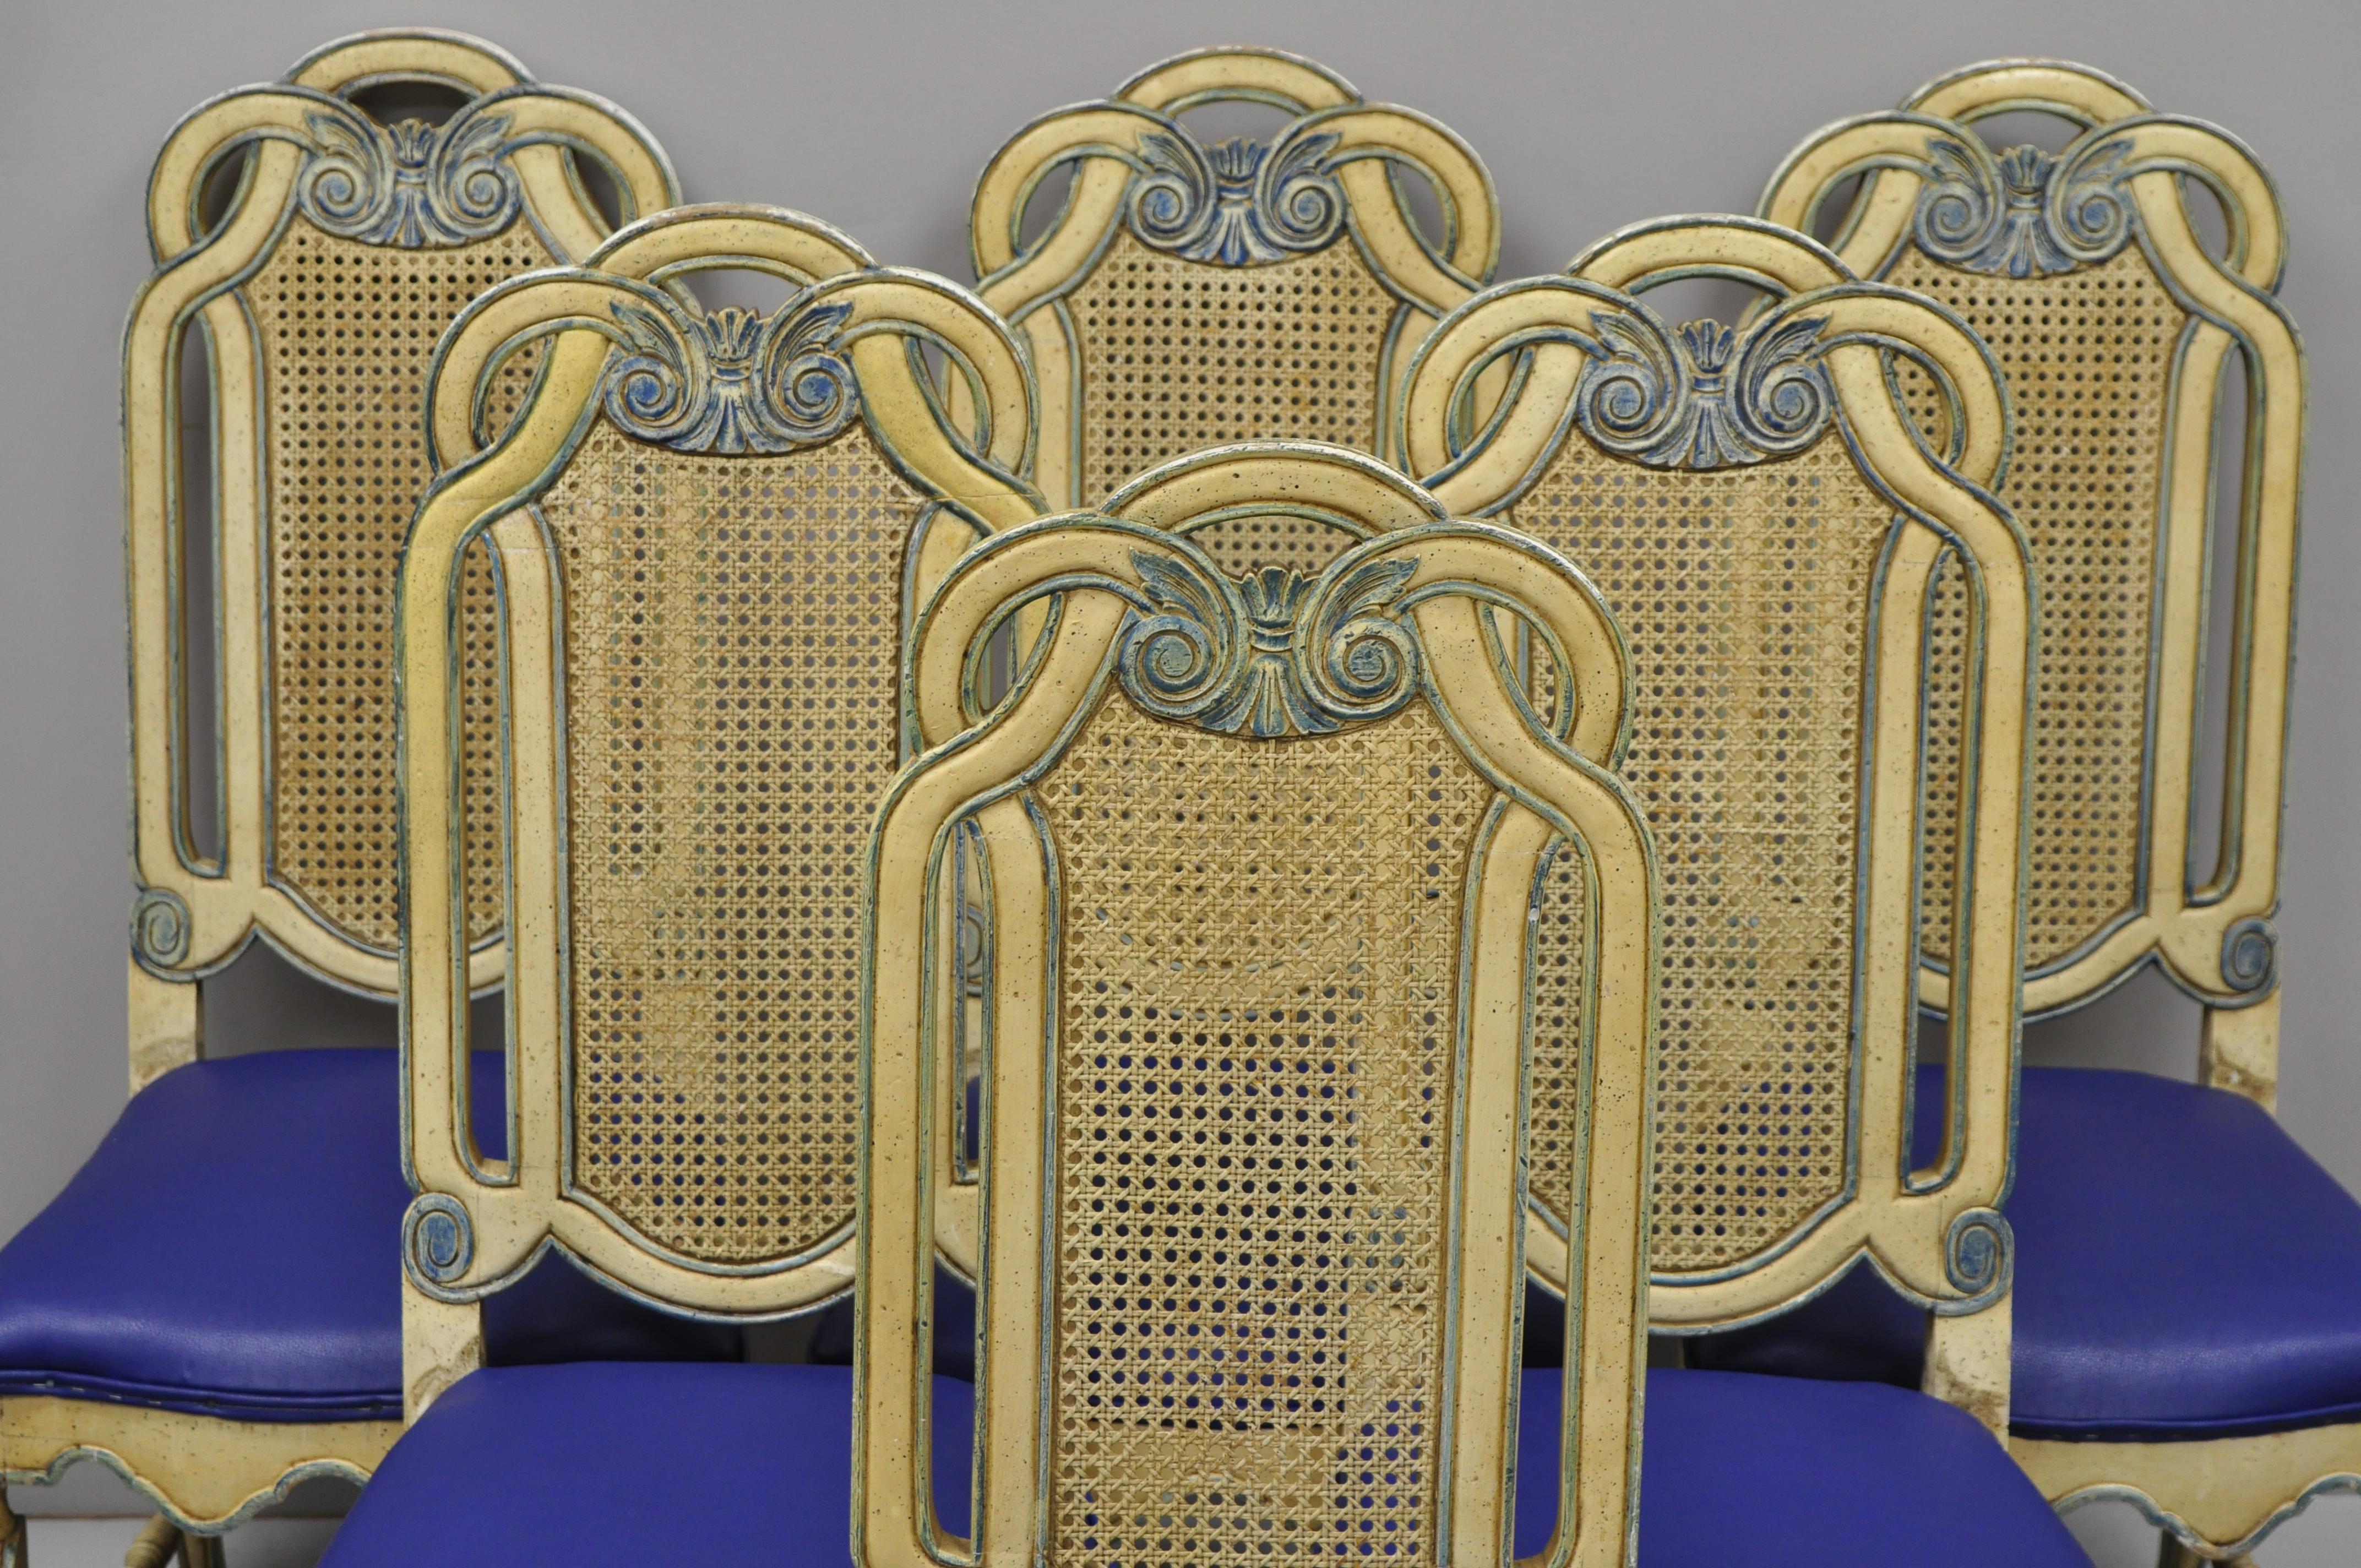 hollywood regency chairs